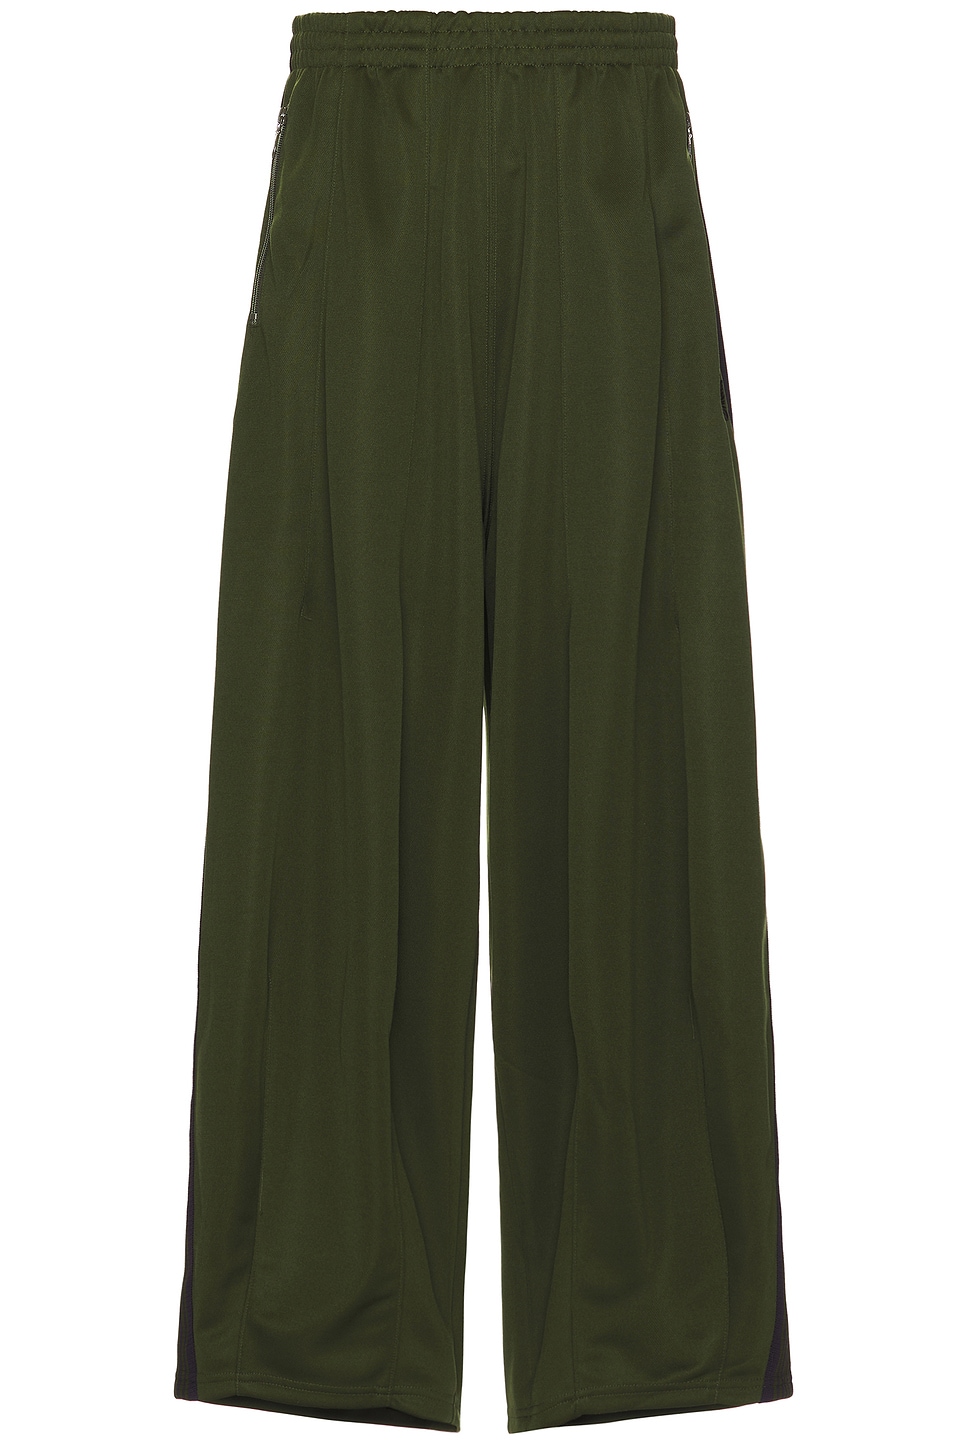 Image 1 of Needles H.D. Track Pant Poly Smooth in Olive